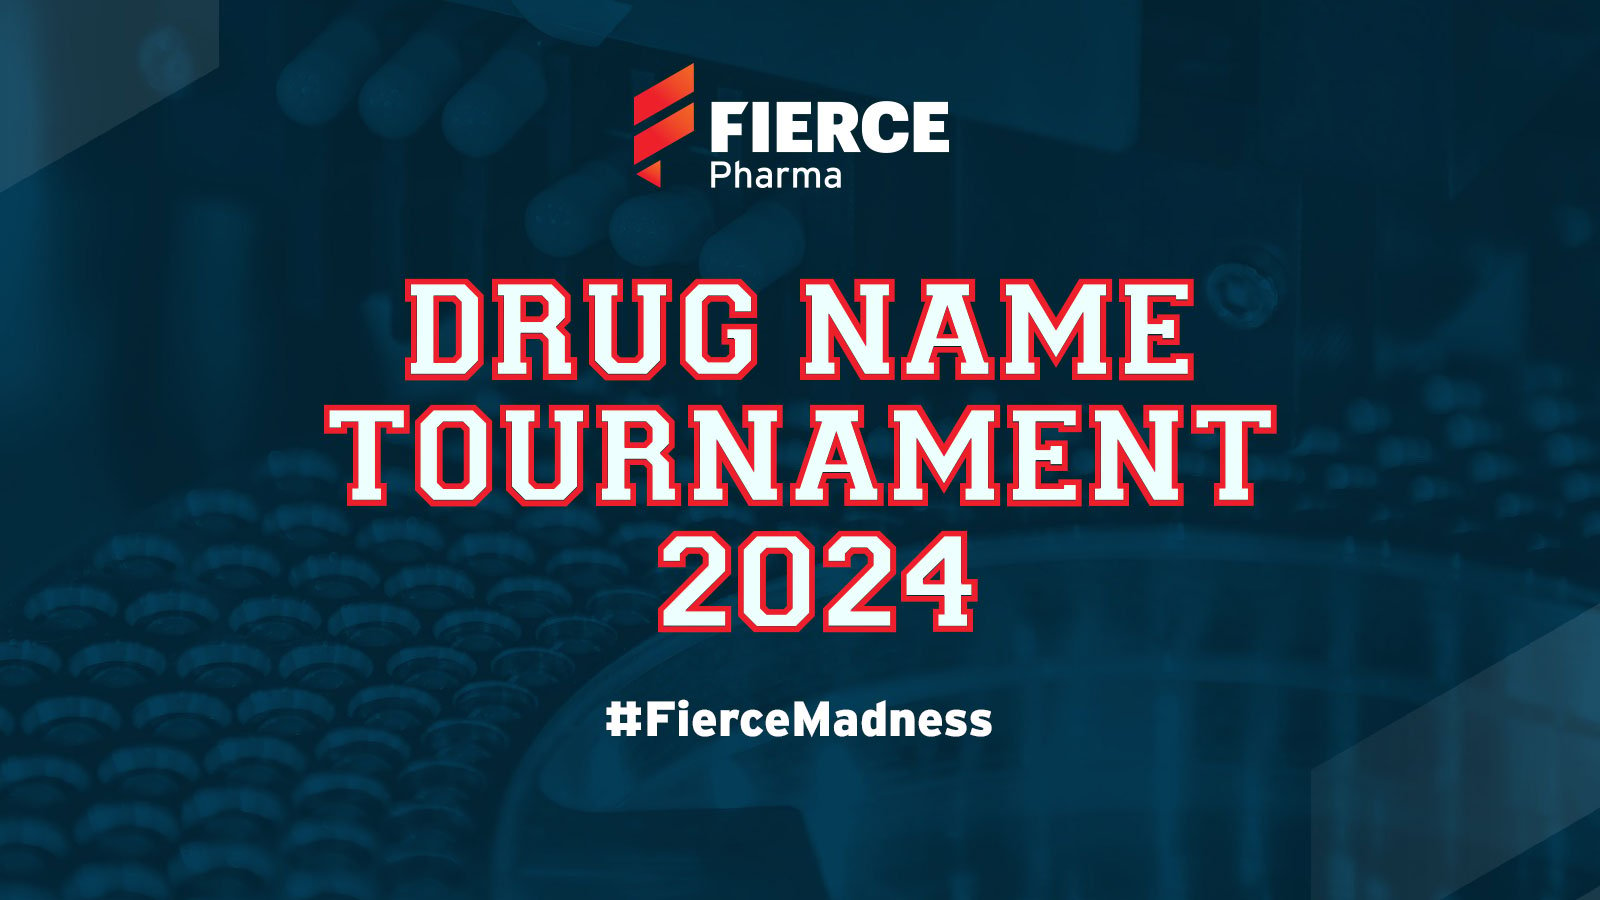  #FierceMadness is back: Get voting in the 2024 drug name tournament 